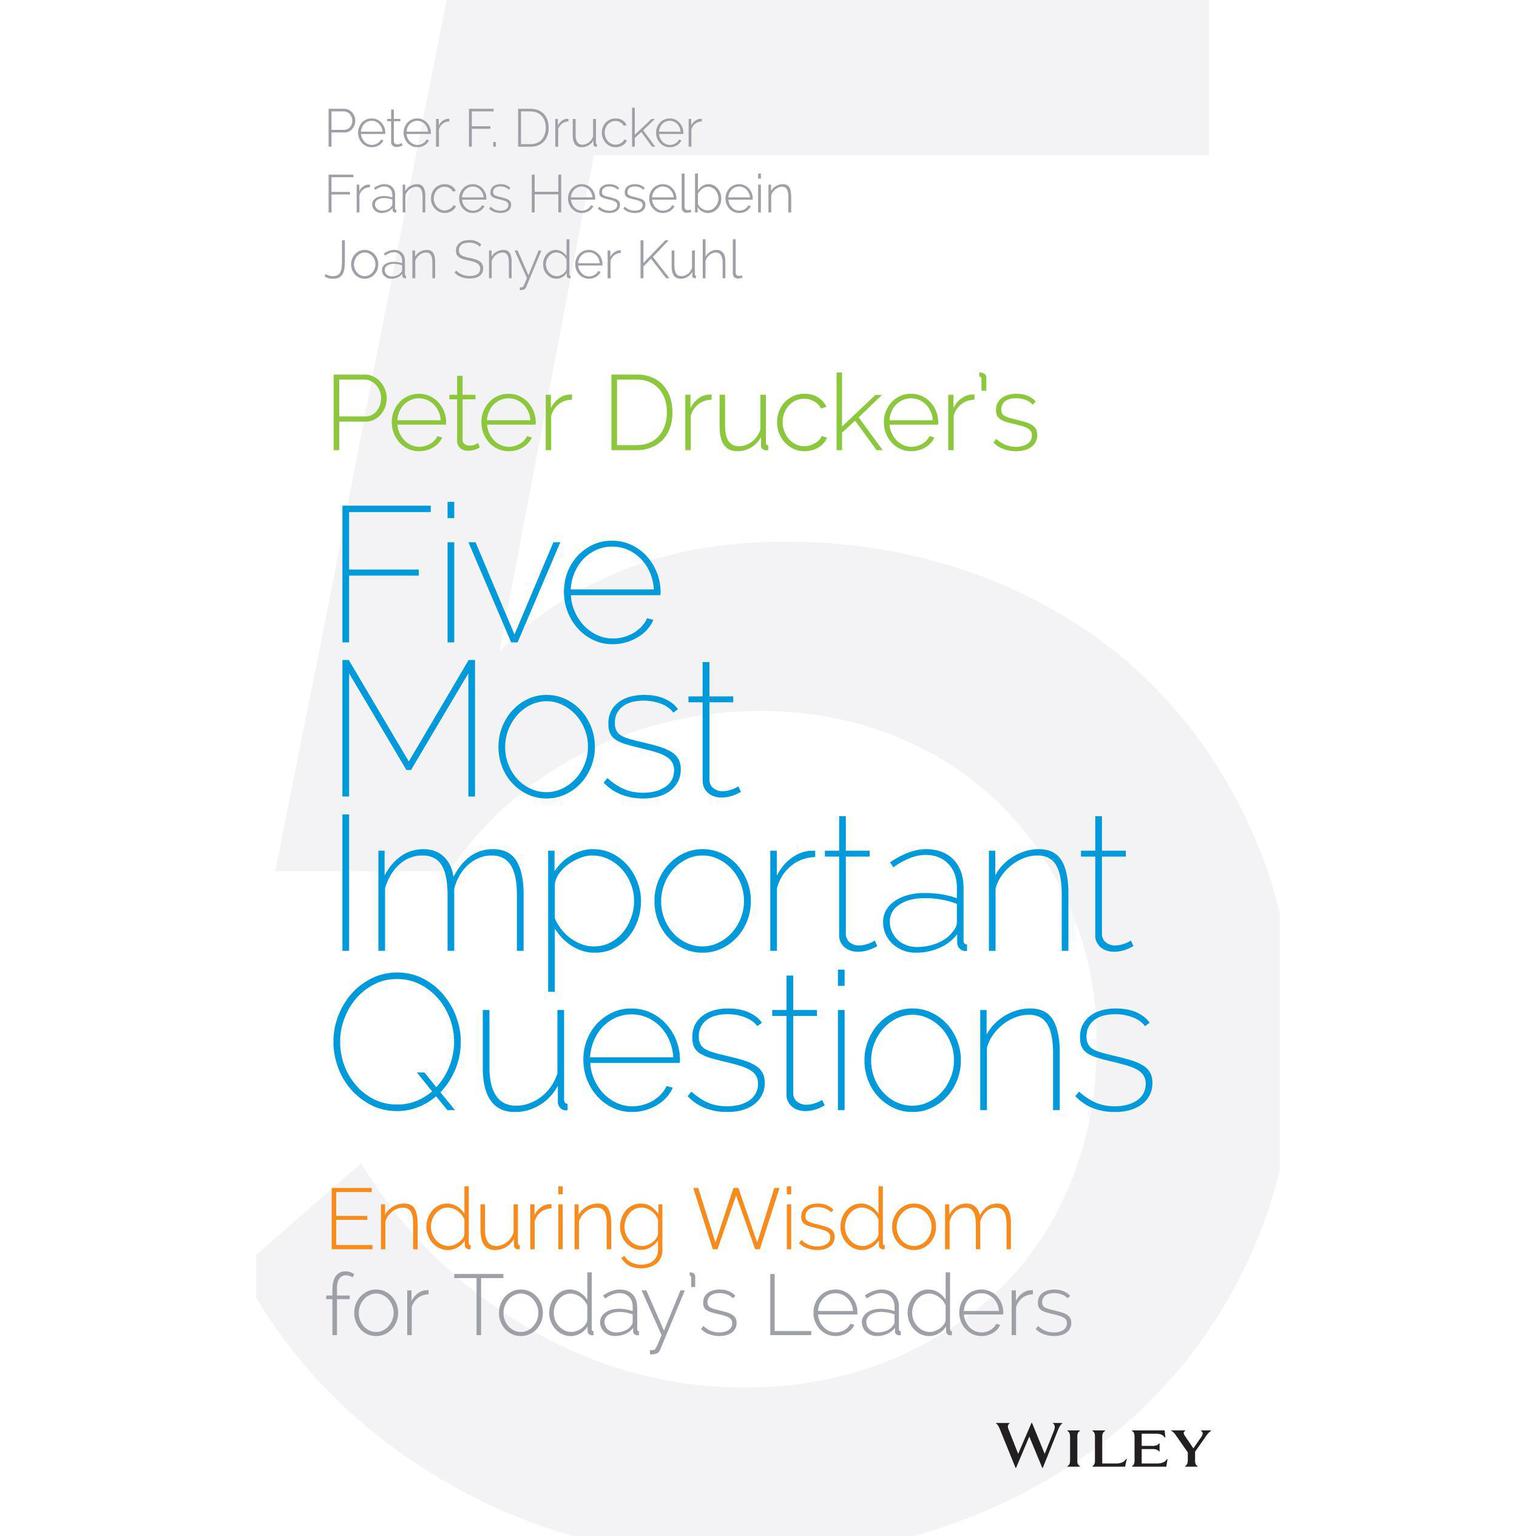 Peter Druckers Five Most Important Questions: Enduring Wisdom for Todays Leaders Audiobook, by Frances Hesselbein